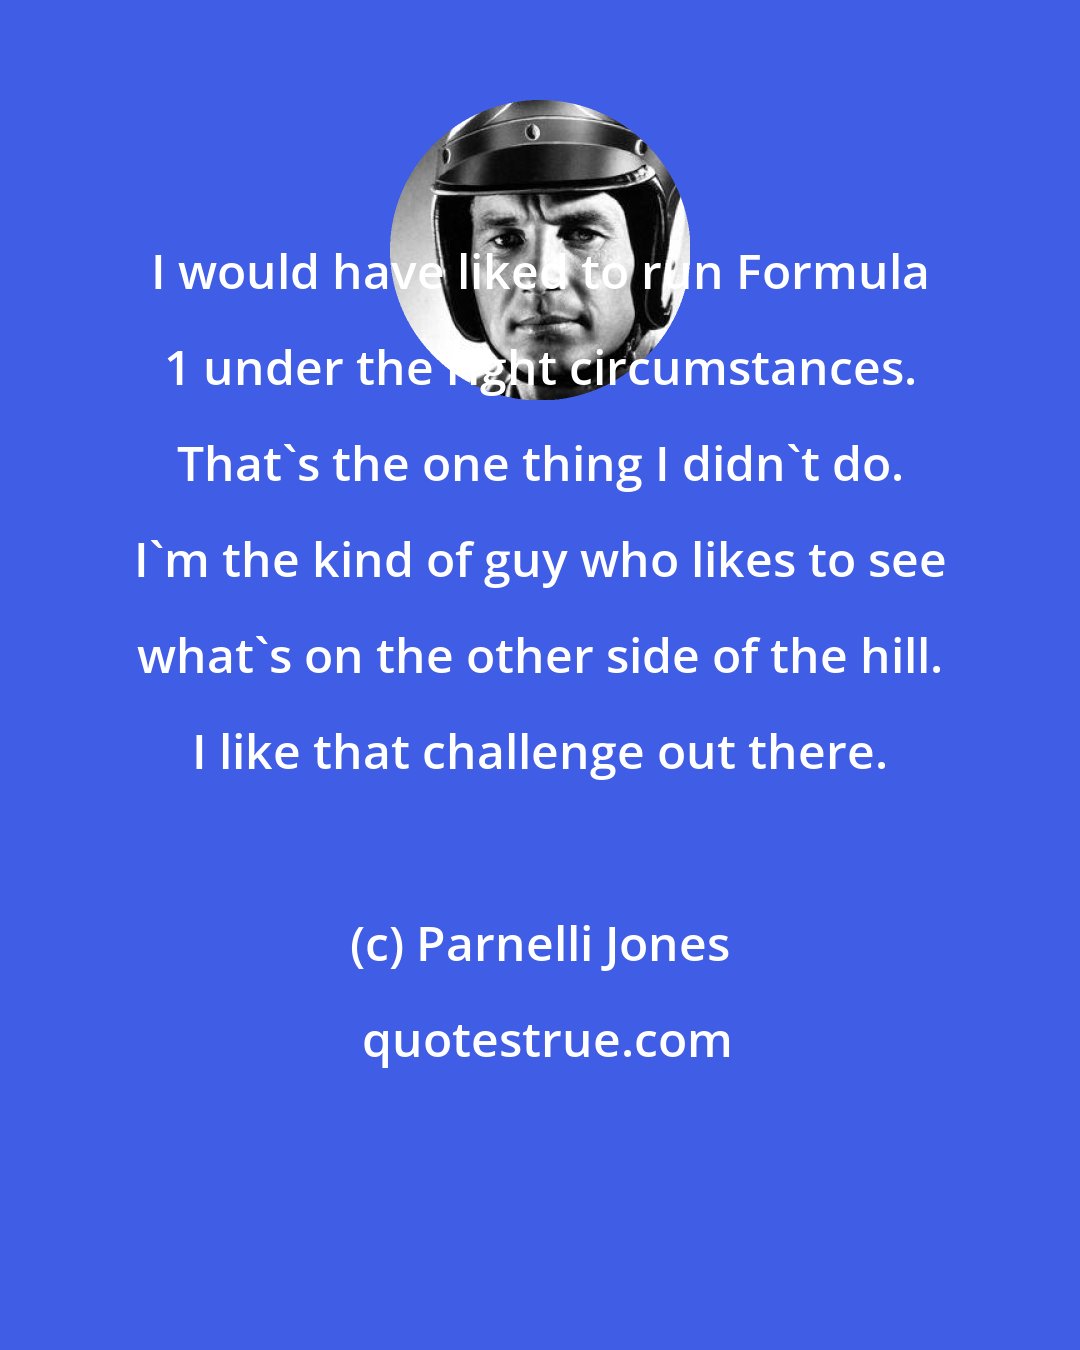 Parnelli Jones: I would have liked to run Formula 1 under the right circumstances. That's the one thing I didn't do. I'm the kind of guy who likes to see what's on the other side of the hill. I like that challenge out there.